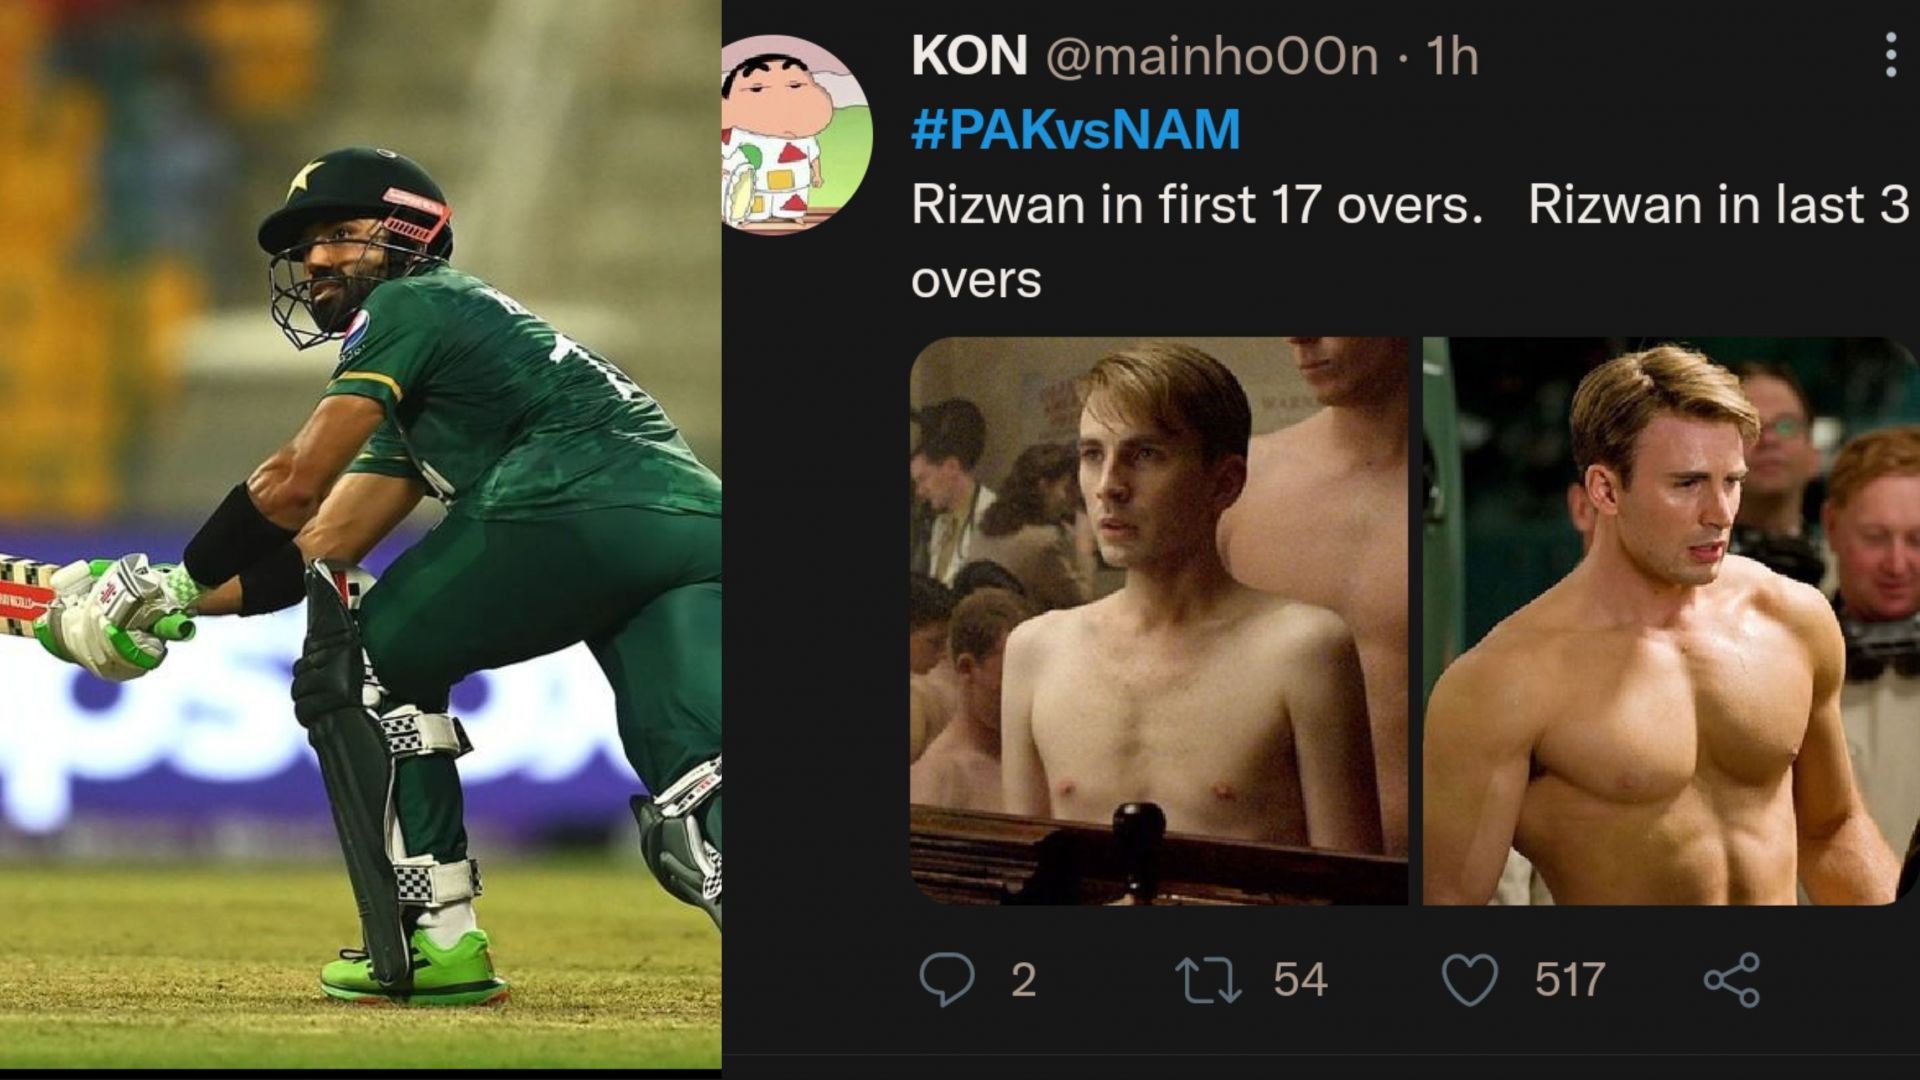 Mohammad Rizwan played a match-winning knock for Pakistan in their T20 World Cup match against Namibia